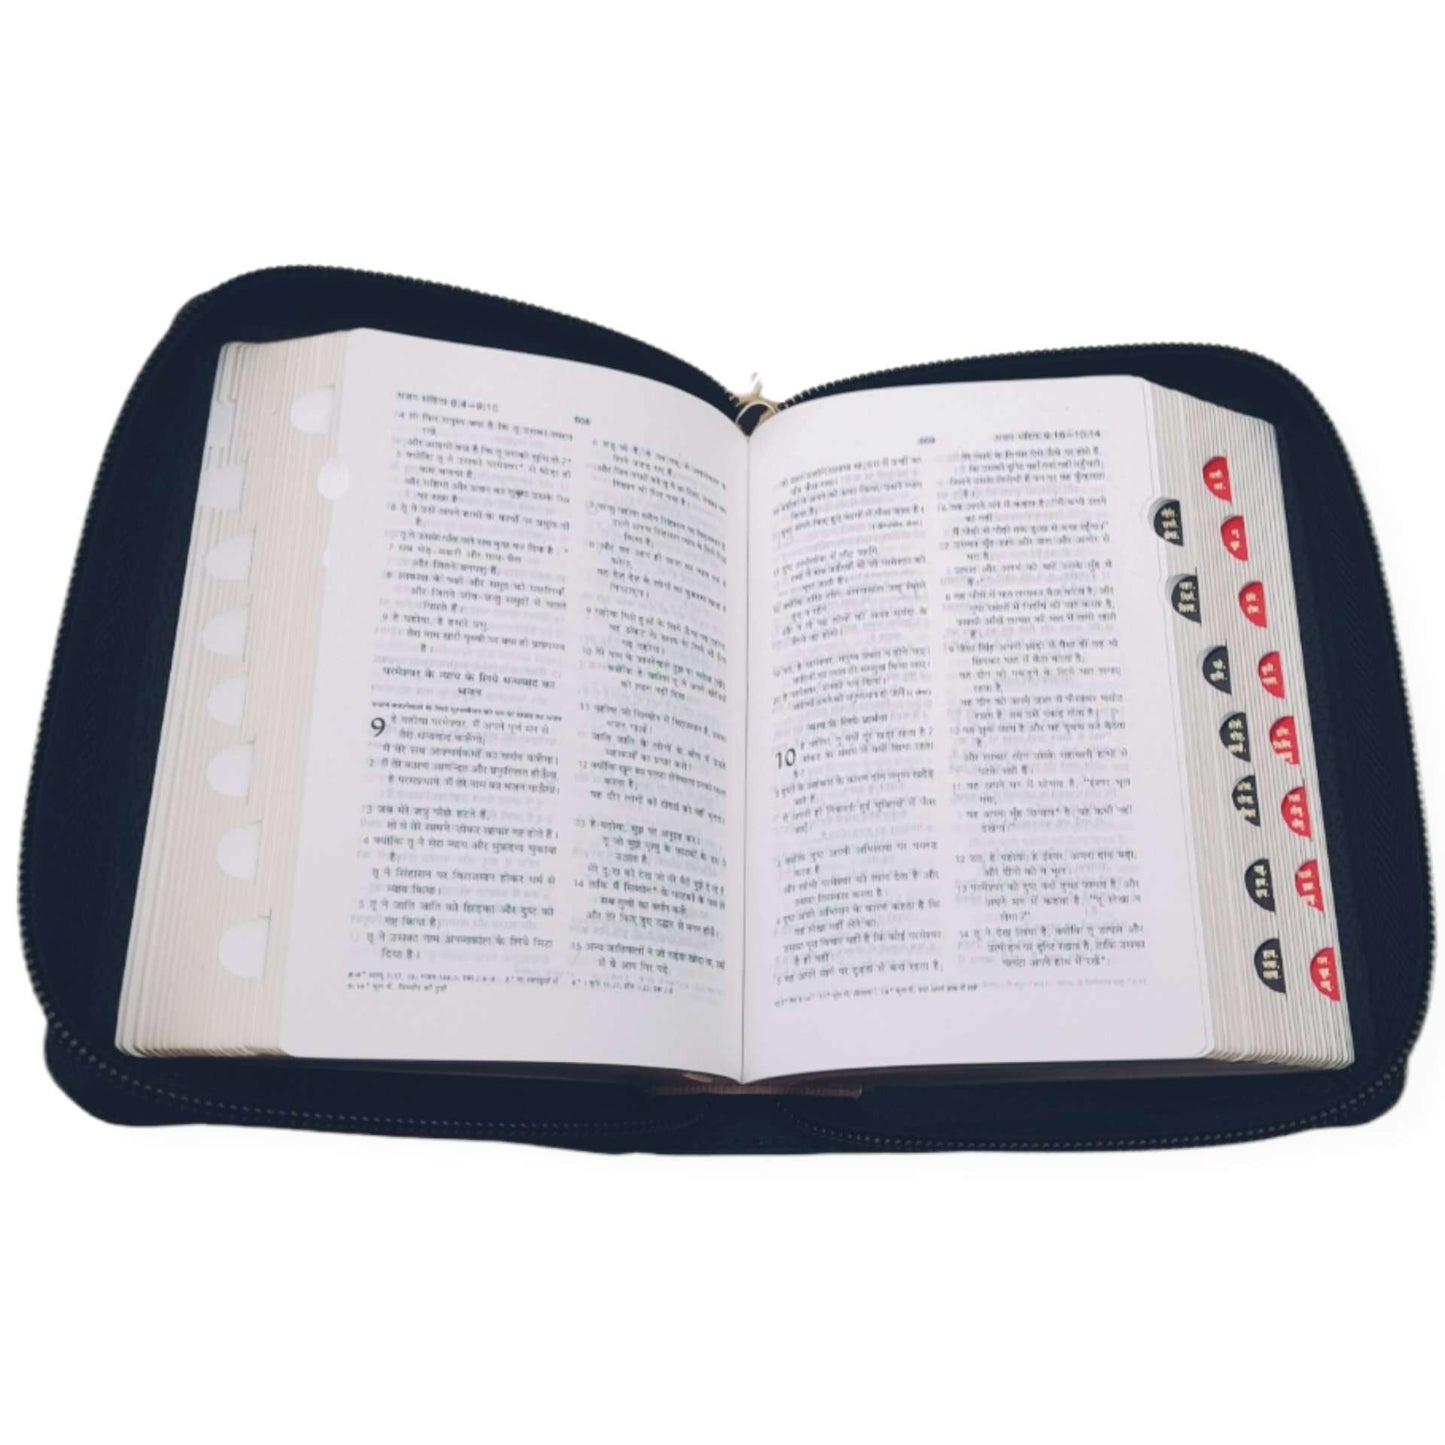 The Holy Hindi Pocket Bible Smaller Vinyl Ti Gilt Zip/Index Bsi Contains Old And New Testament